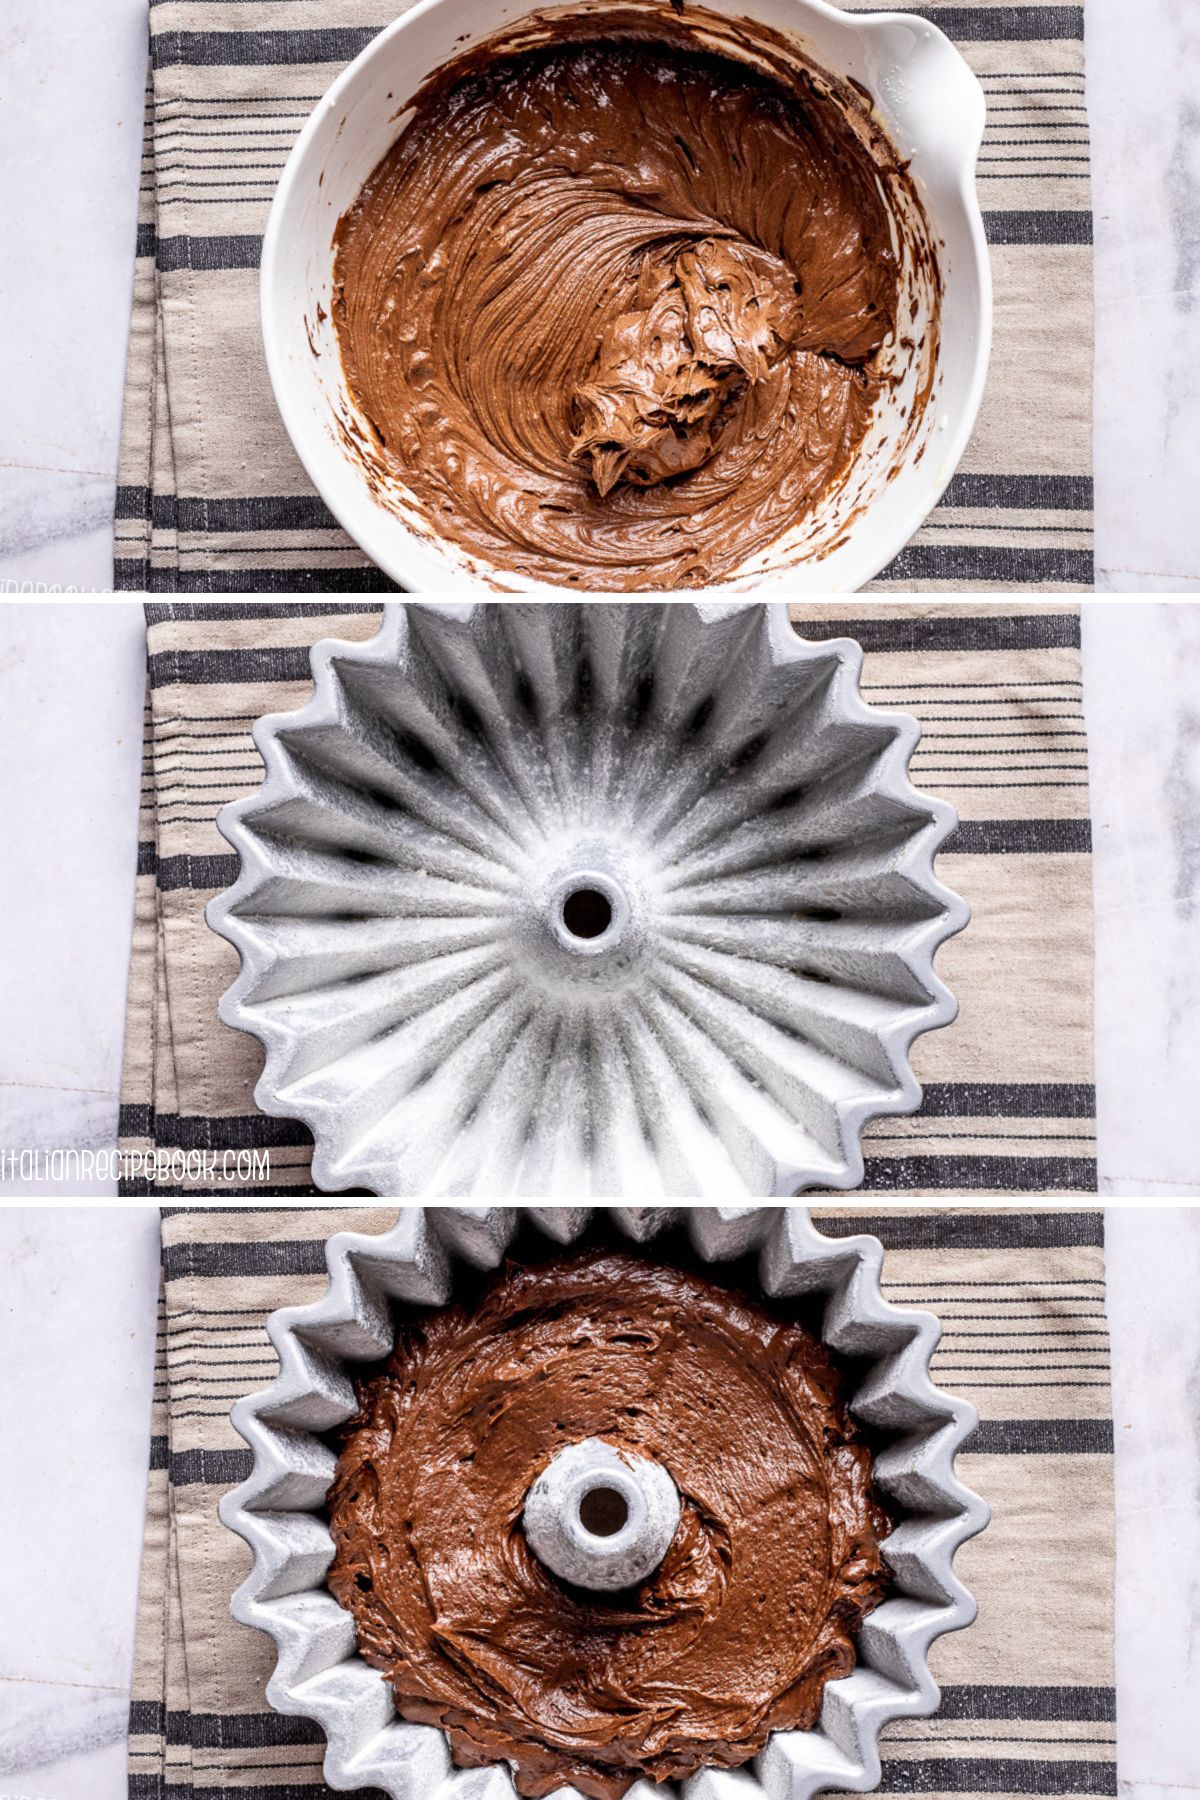 chocolate ricotta cake batter - grease the cake pan and pour the batter in